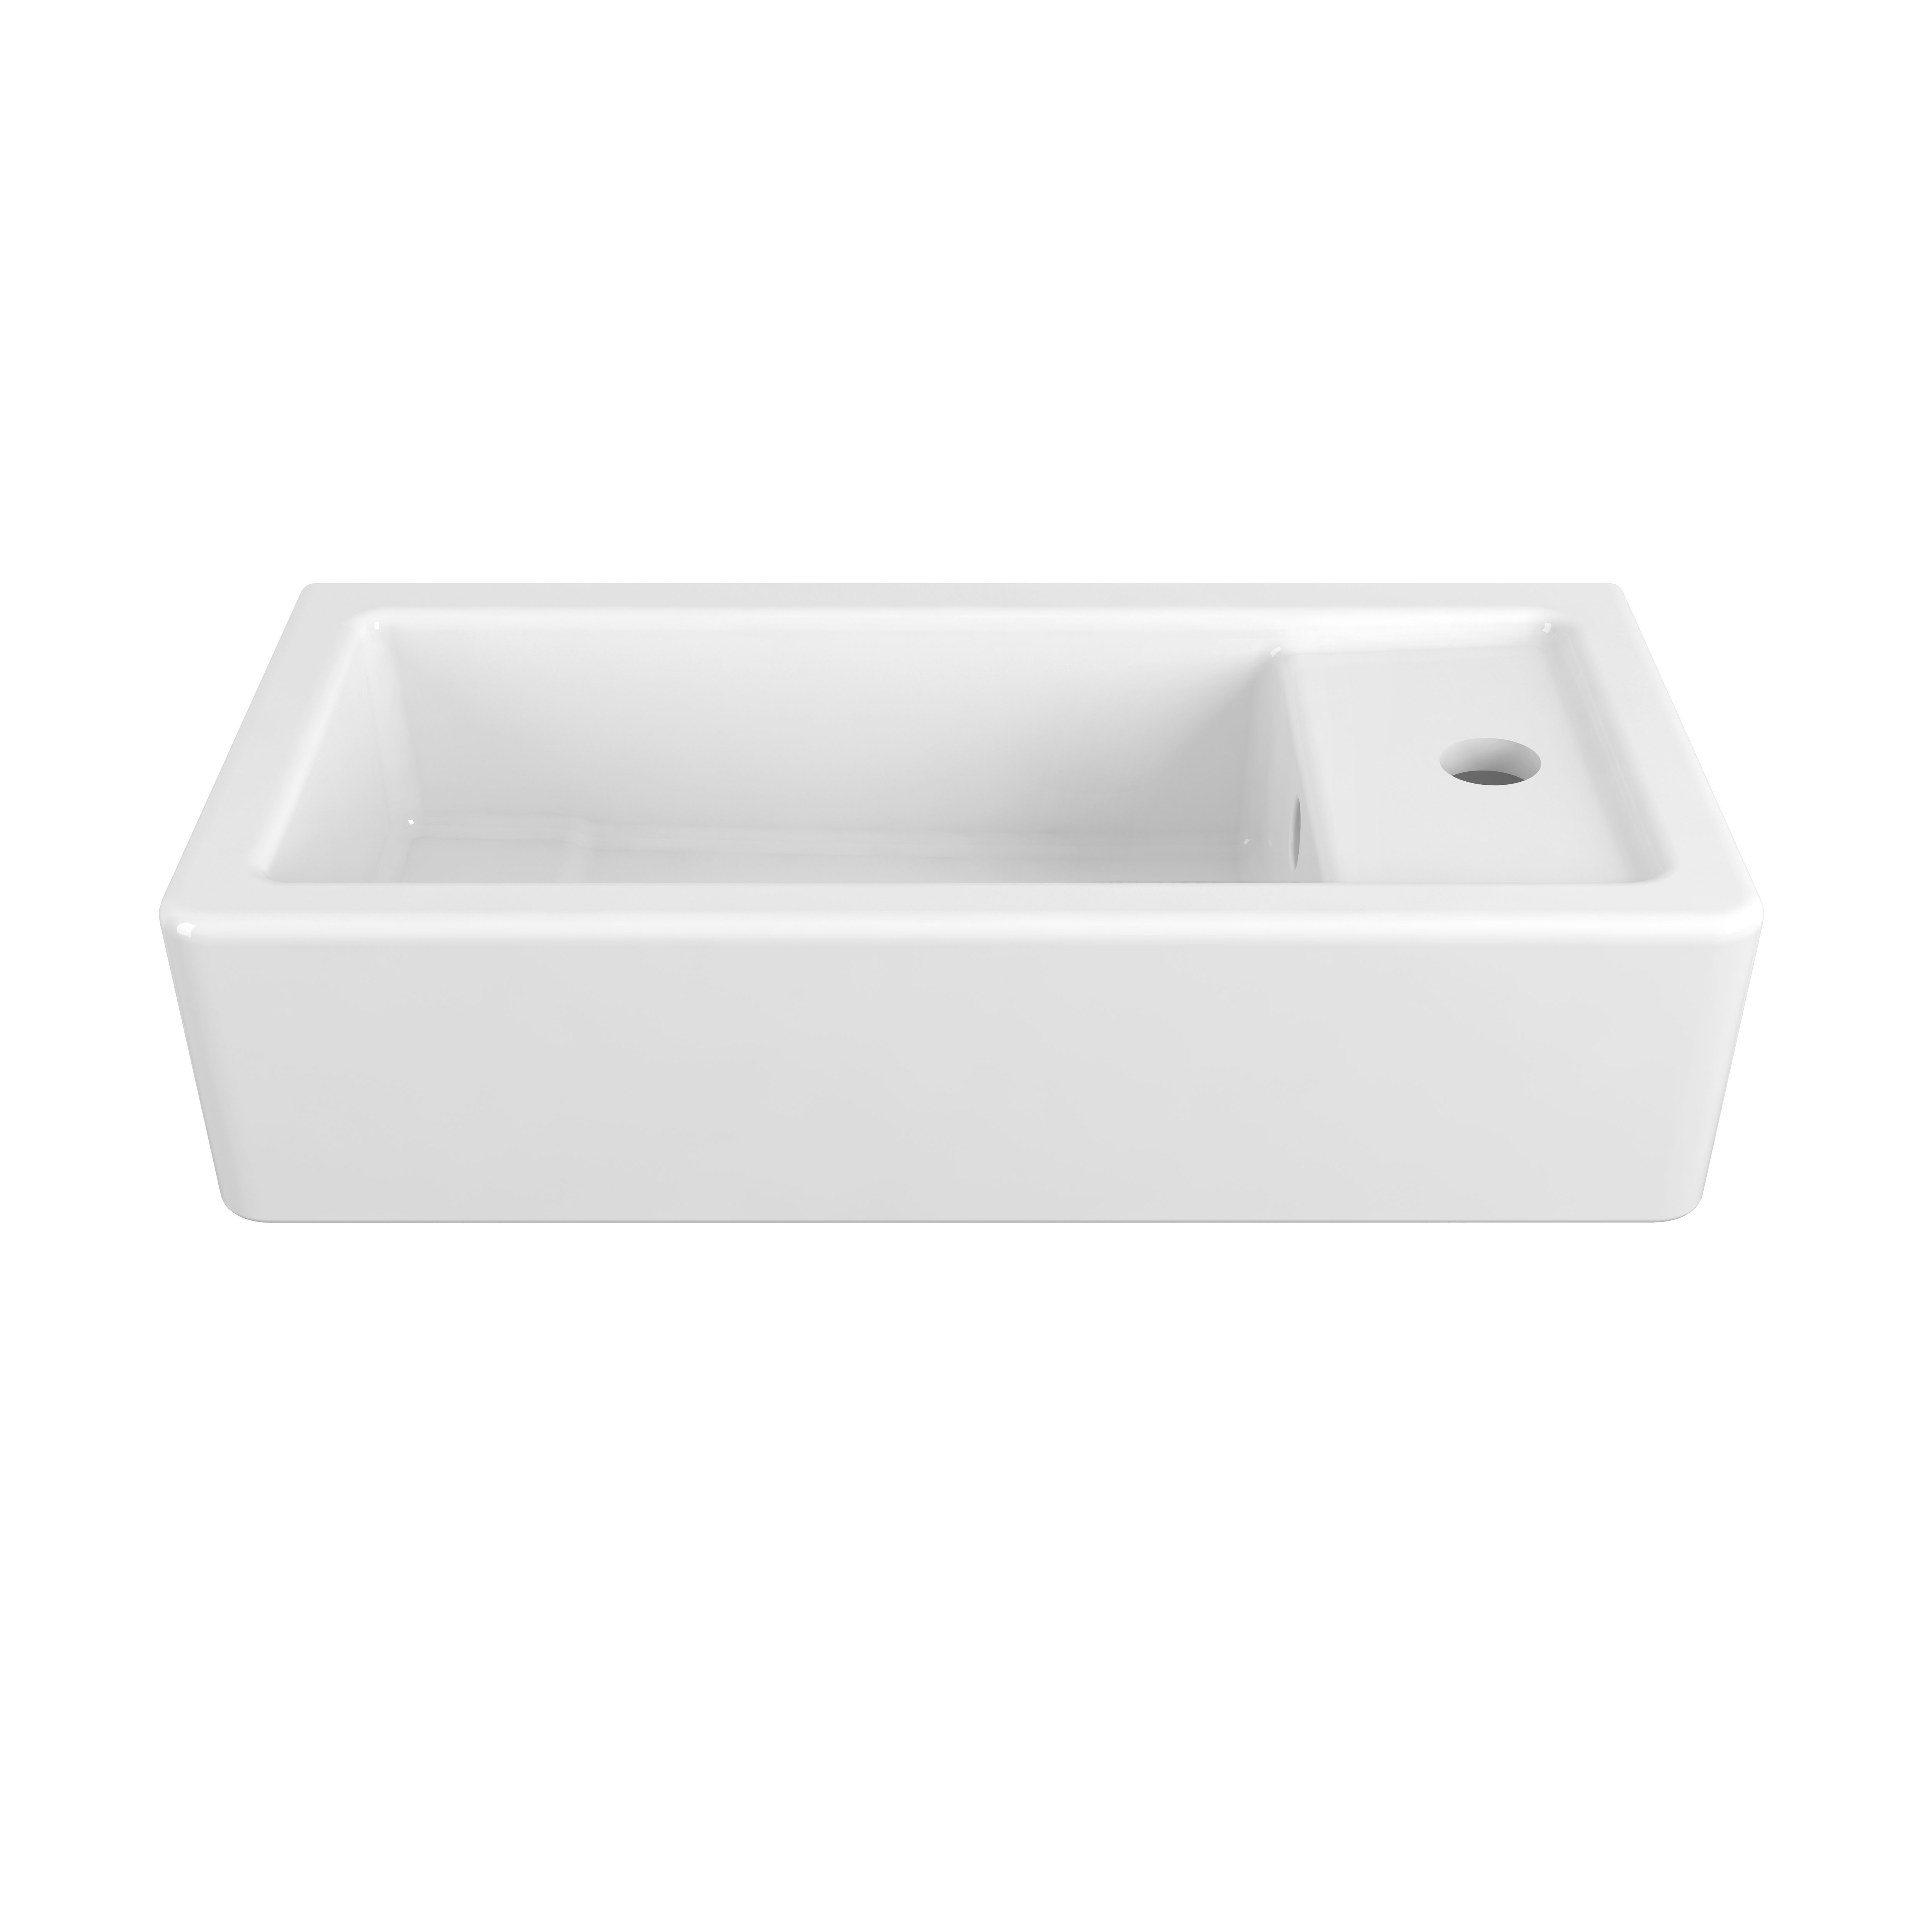 Cossu® Wall-Hung Sink, 1-Hole with Right-Hand Drain